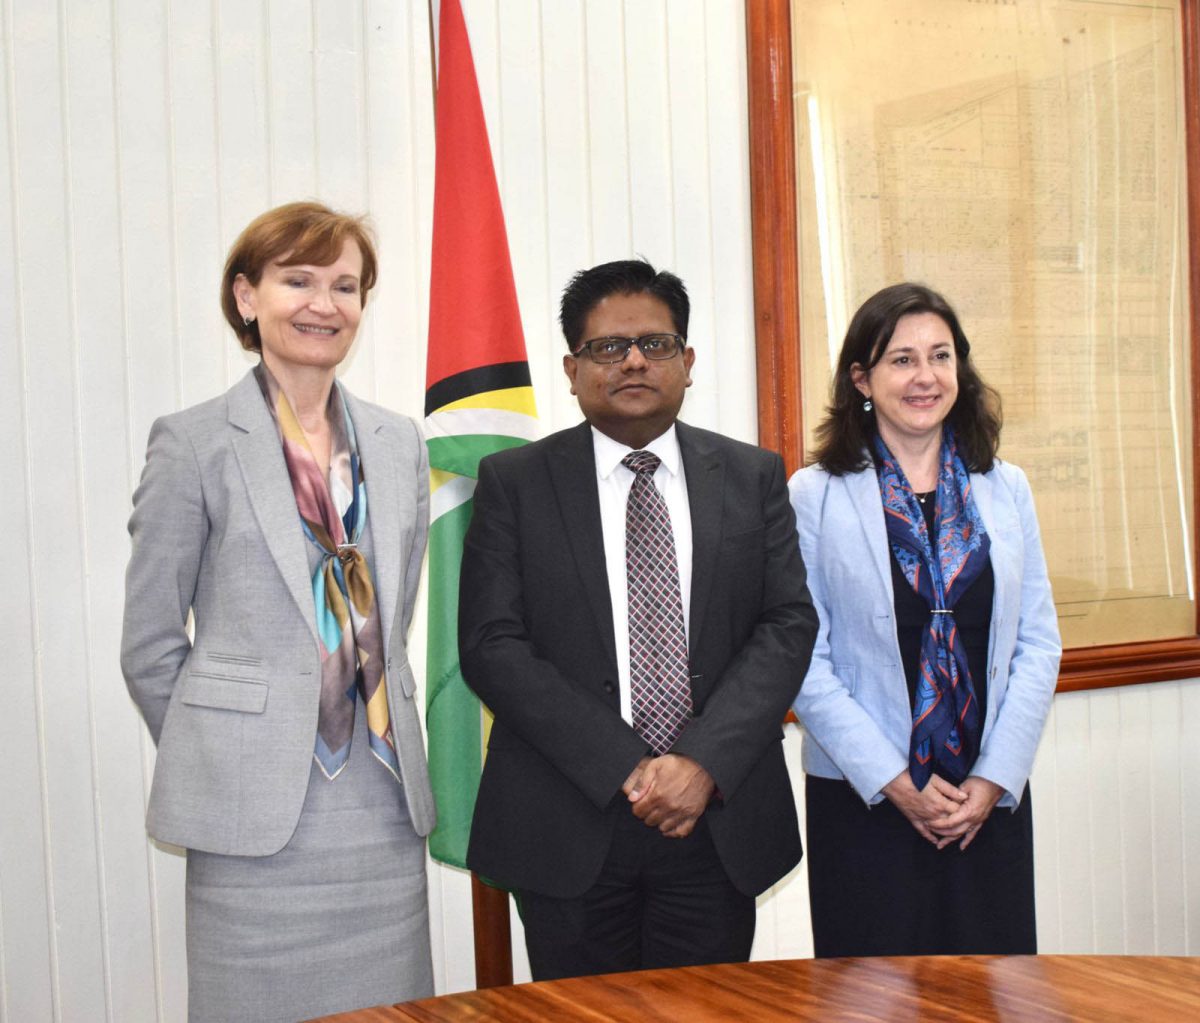 Finance Minister Dr Ashni Singh (centre) with Country Director for the Caribbean, Lilia Burunciuc (left) and the new Resident Representative of the Bank for Guyana and Suriname, Dilletta Doretti. (Ministry of Finance photo)